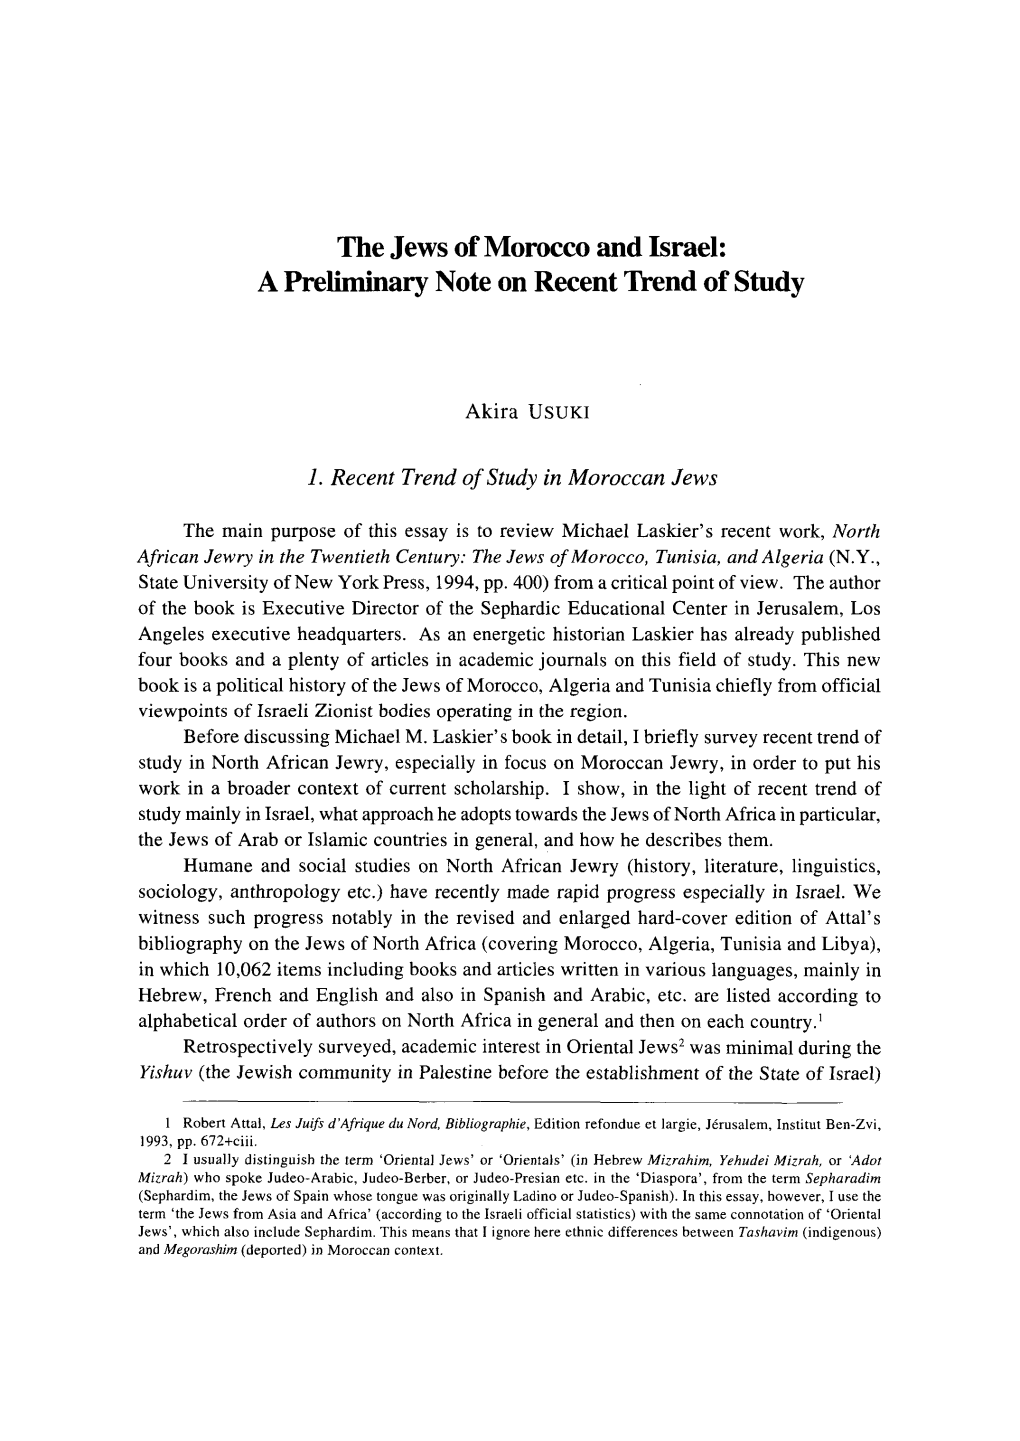 The Jews of Morocco and Israel: a Preliminary Note on Recent Trend of Study